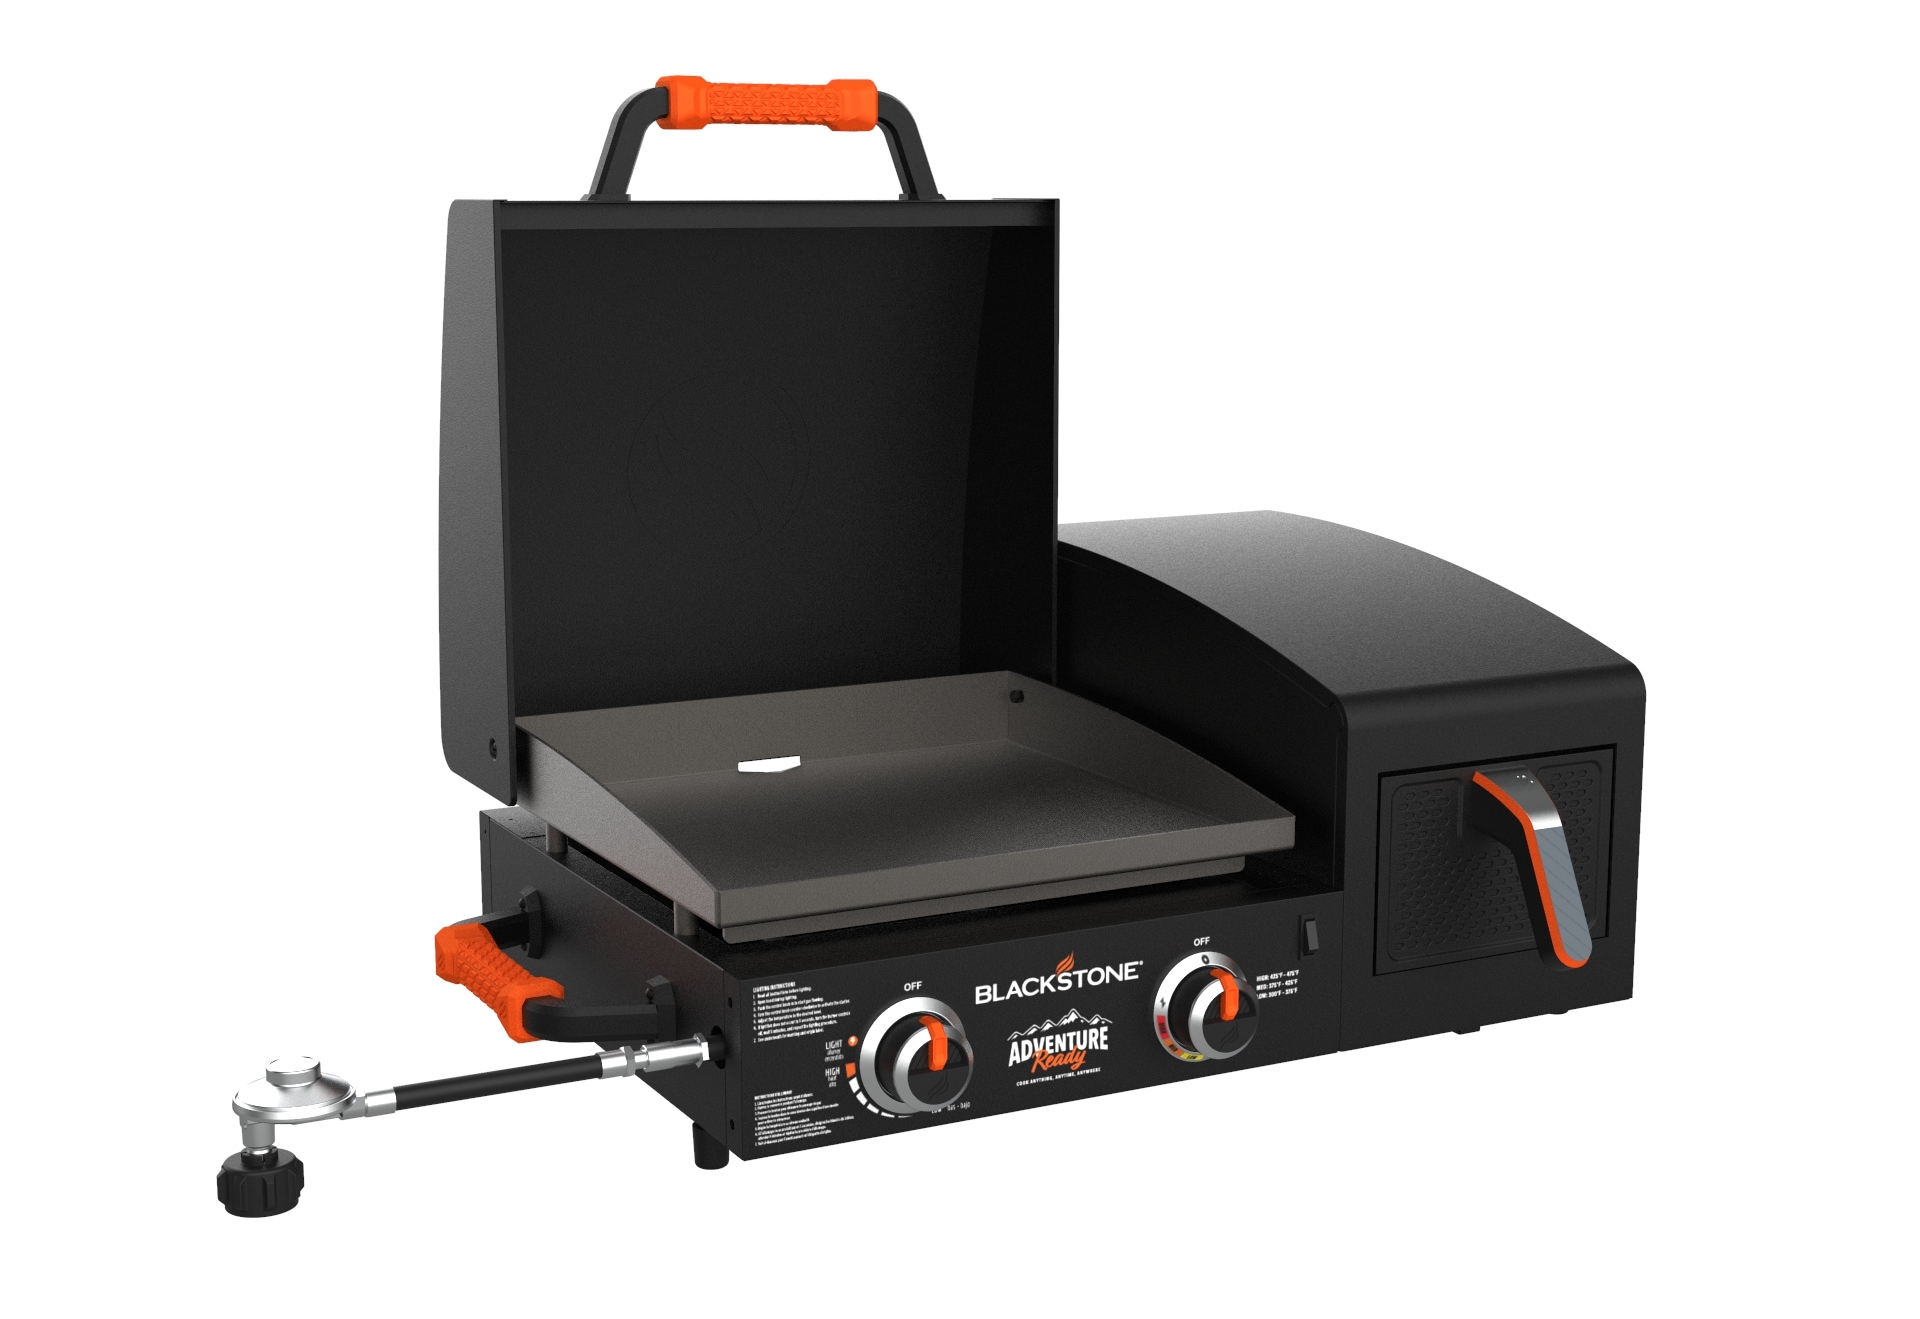 Blackstone Adventure Ready 17 Griddle with Electric Air Fryer 